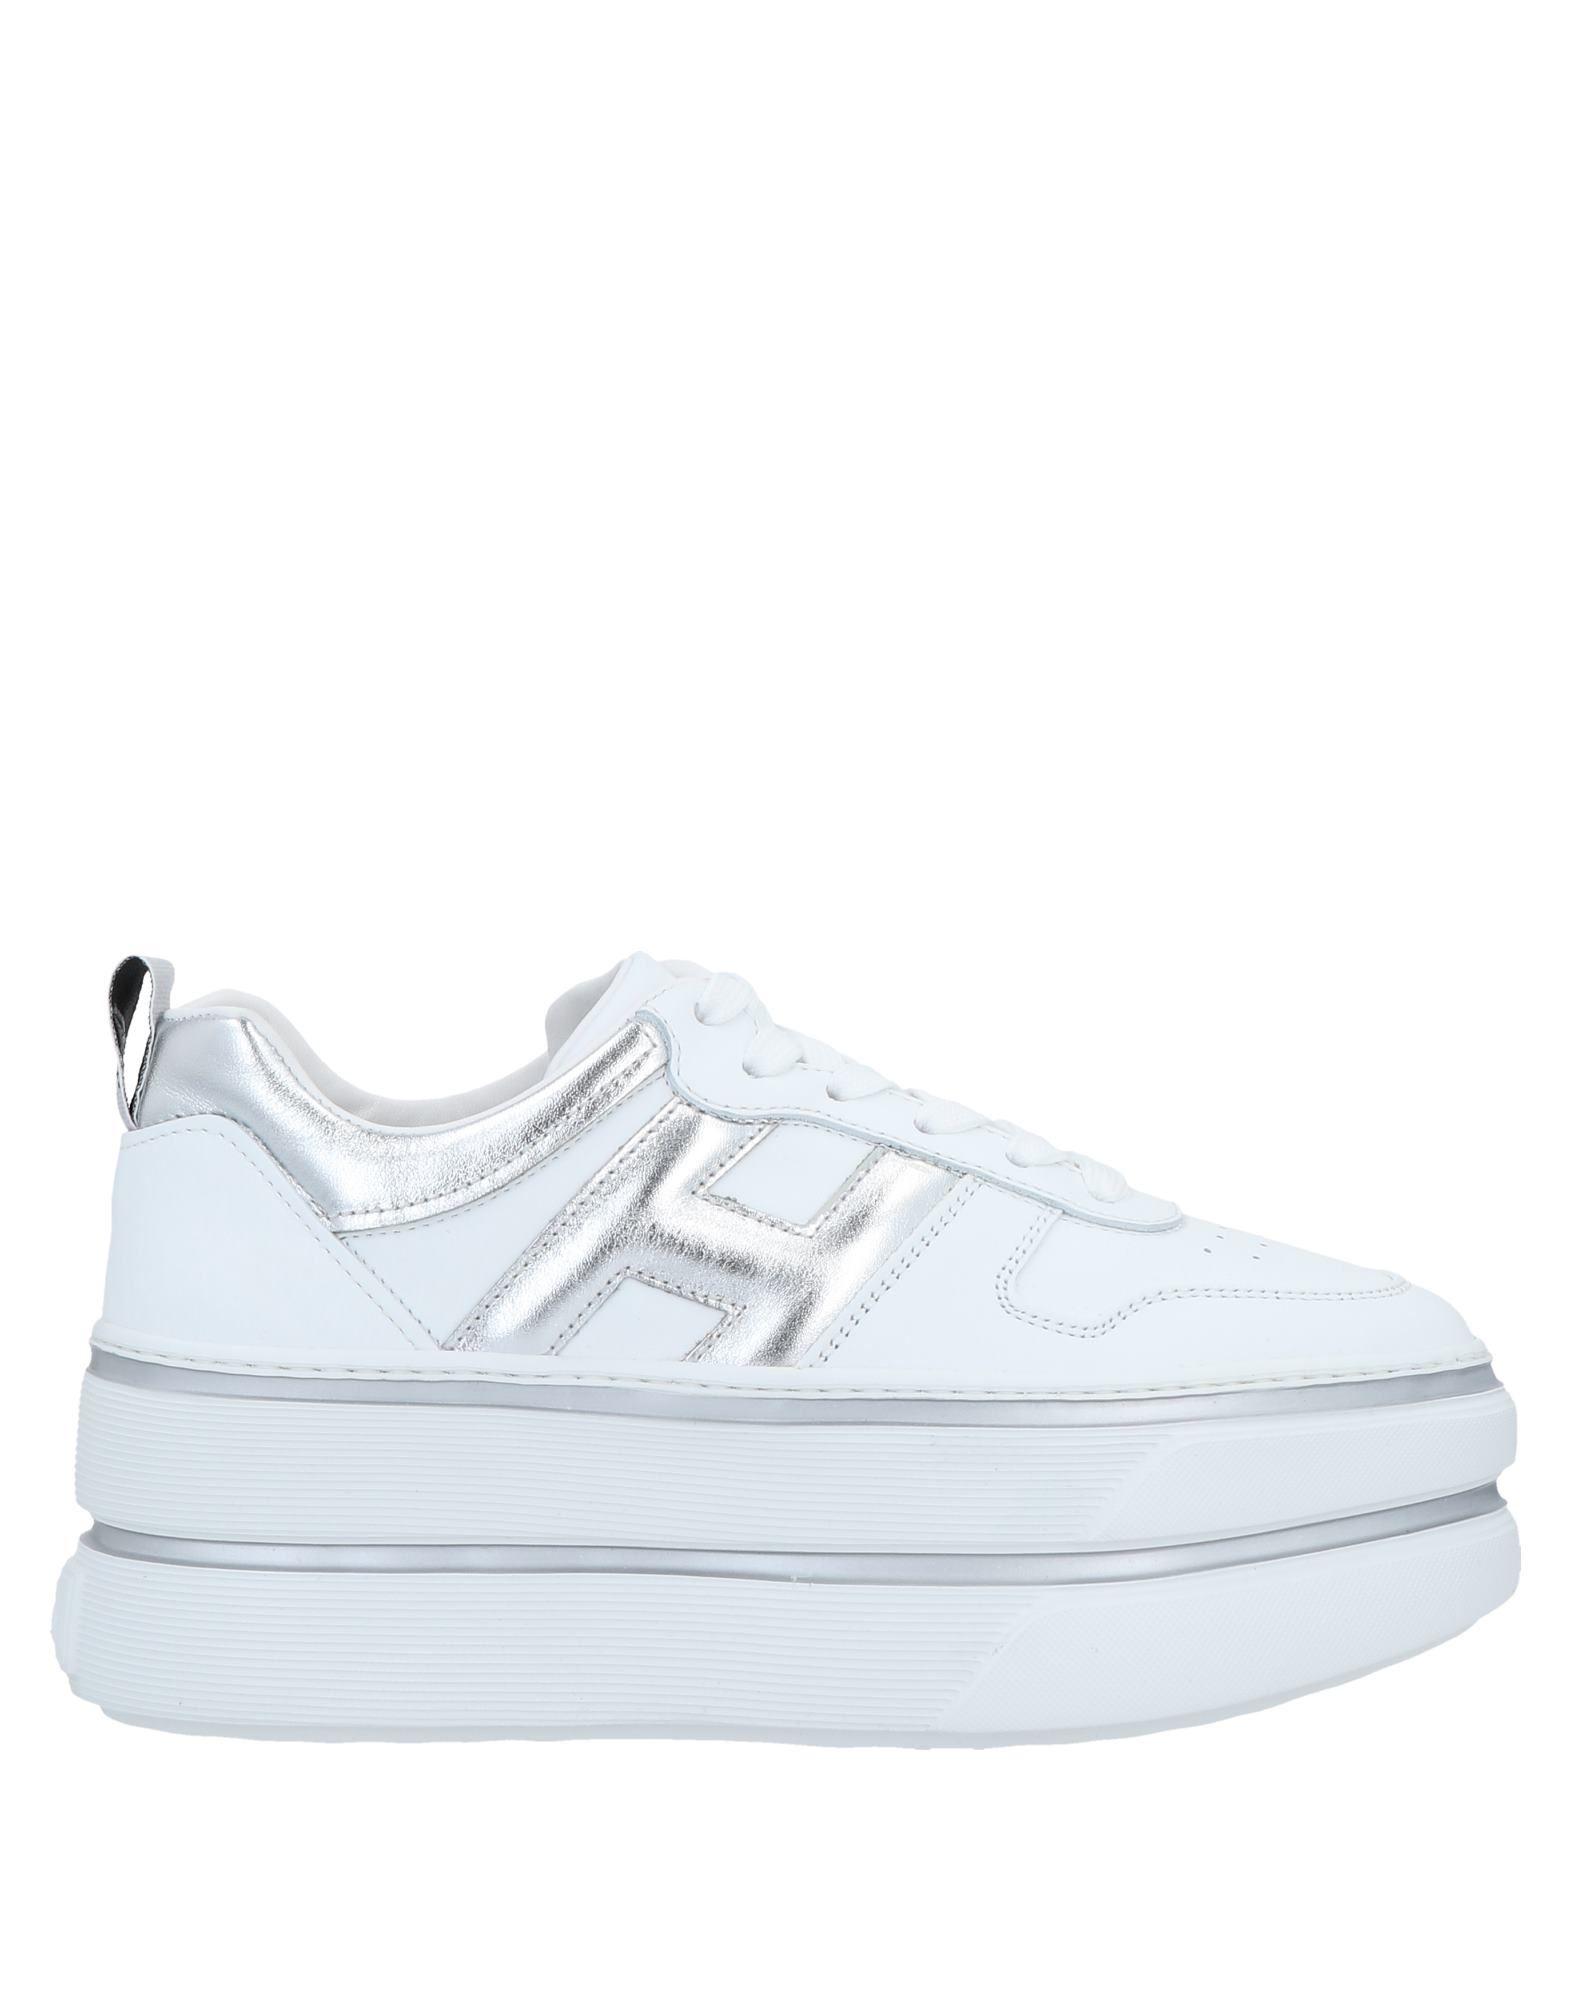 Hogan Leather Sneakers in White | Lyst